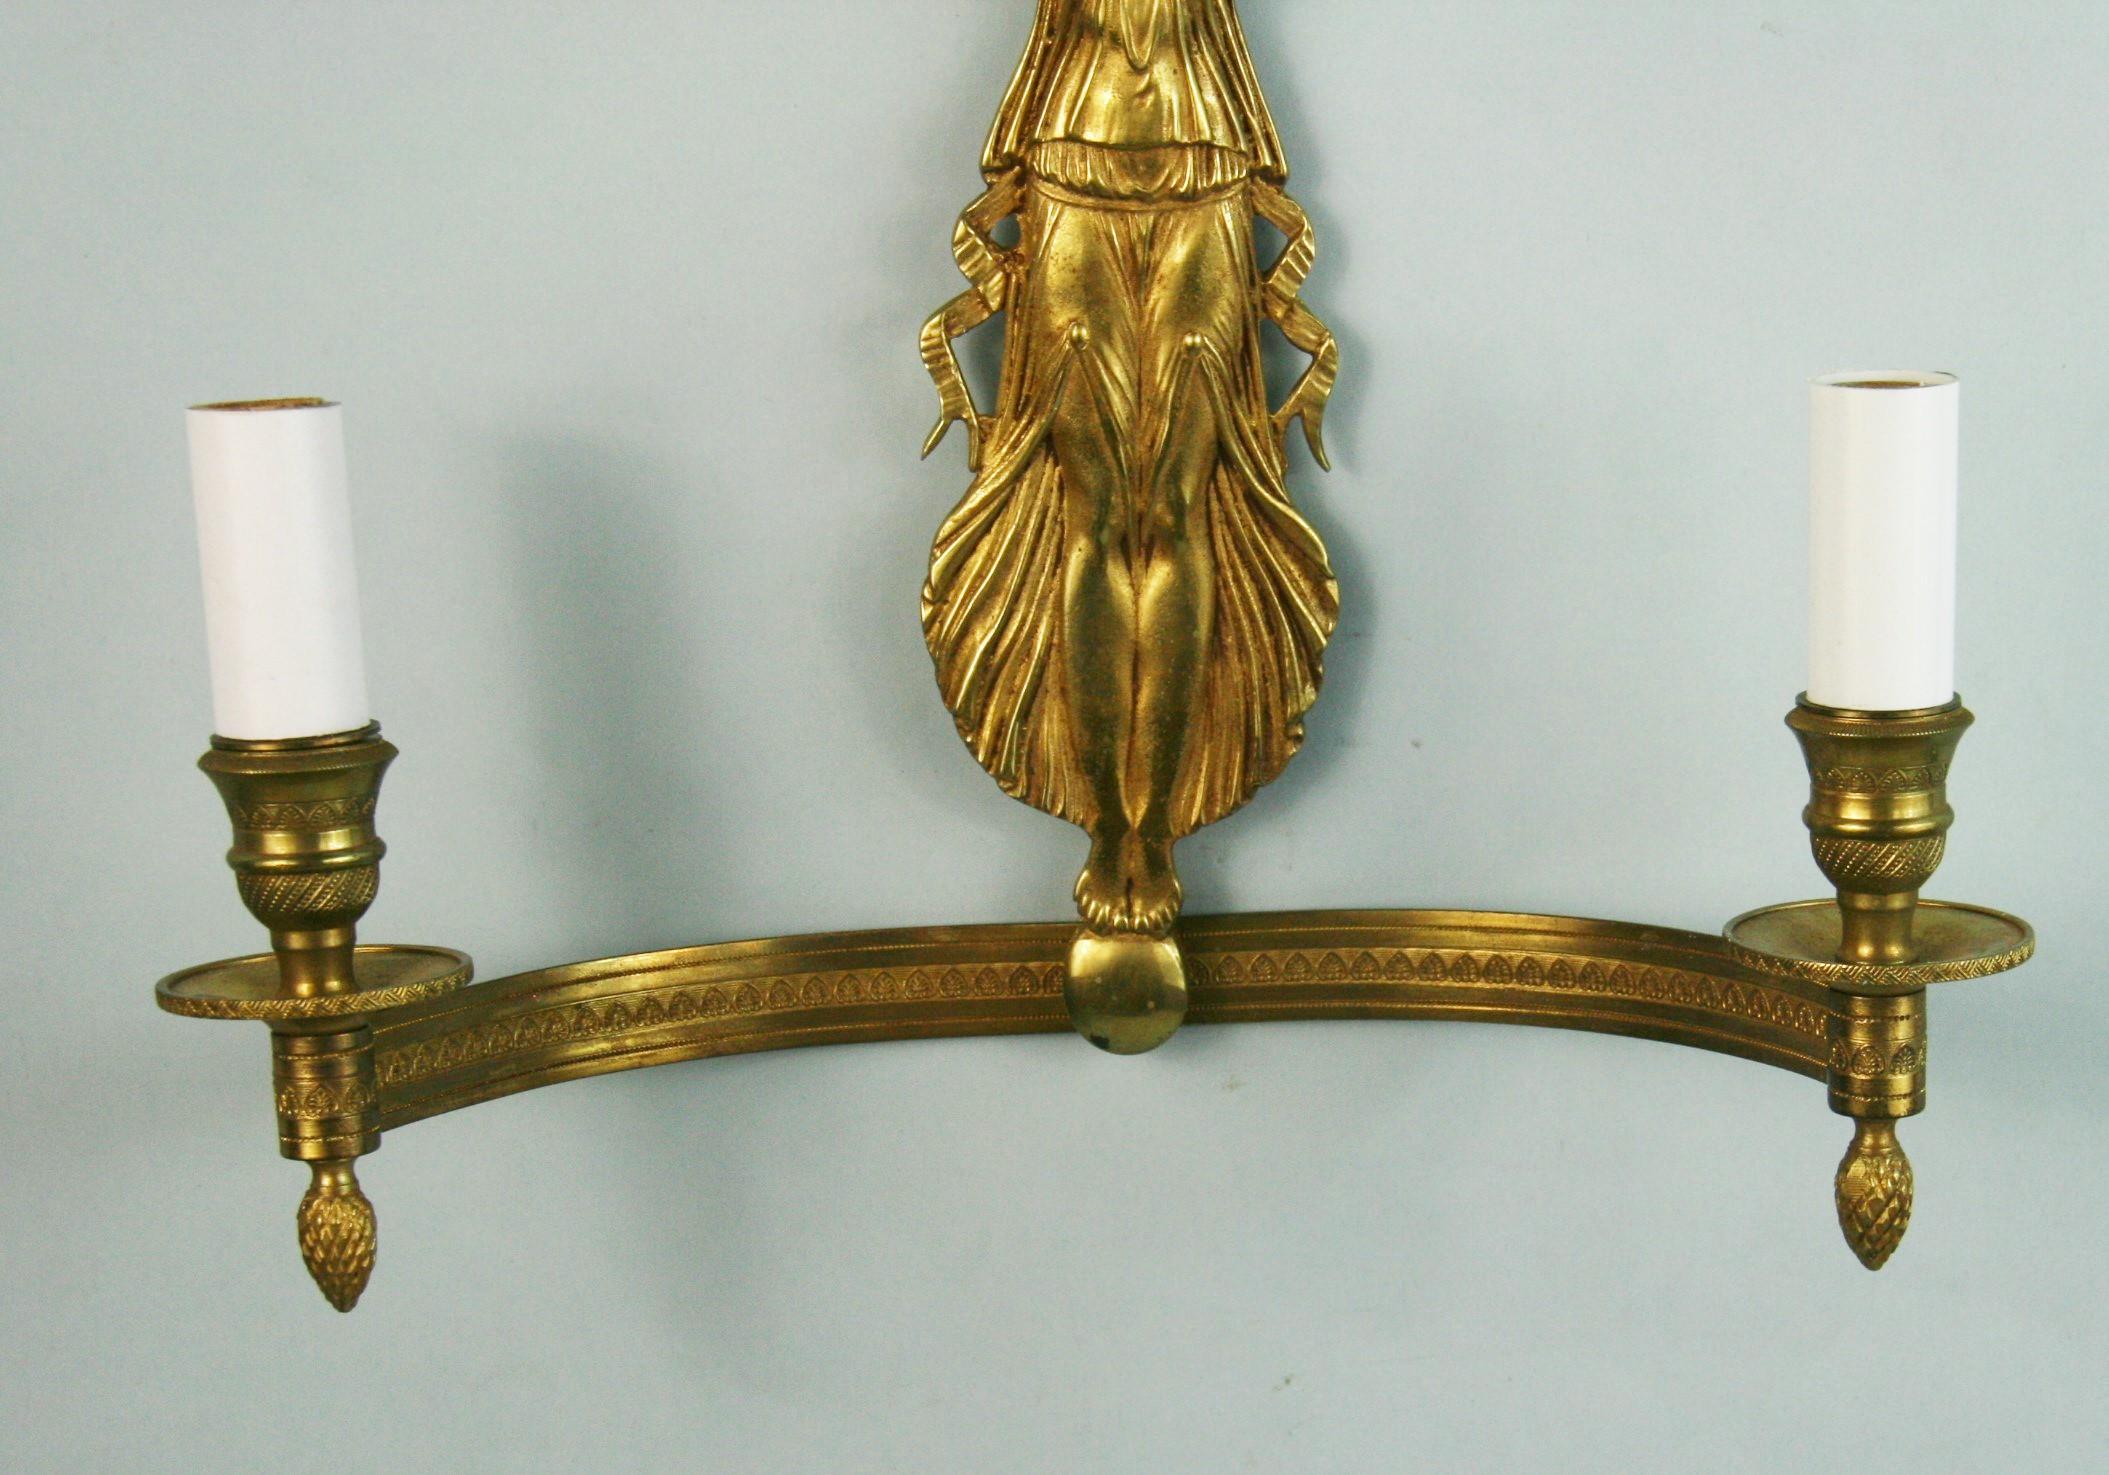  French Empire  Winged Figural Wall Sconces 1920's a Pair For Sale 2